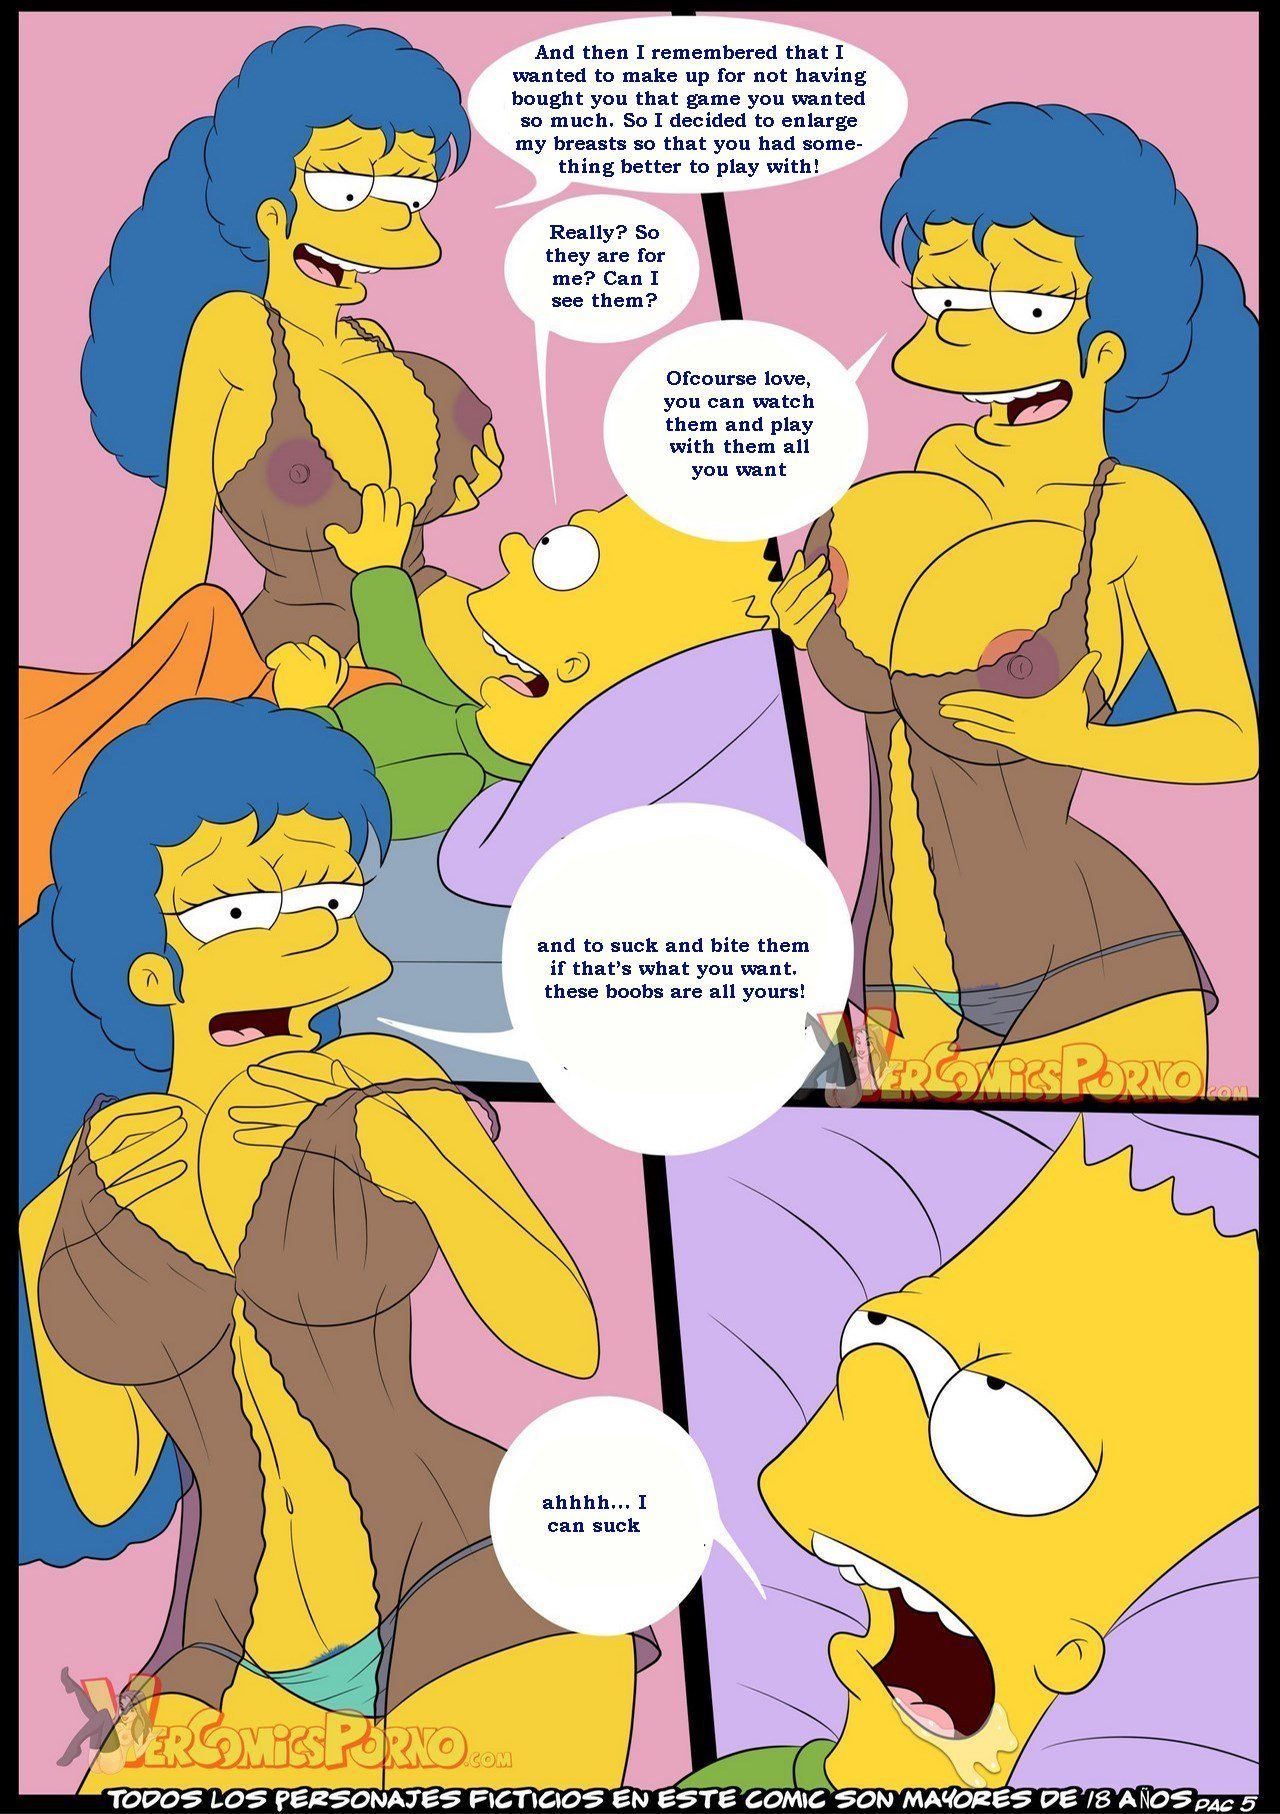 best of Boobs fuck big nude Marge pics bart